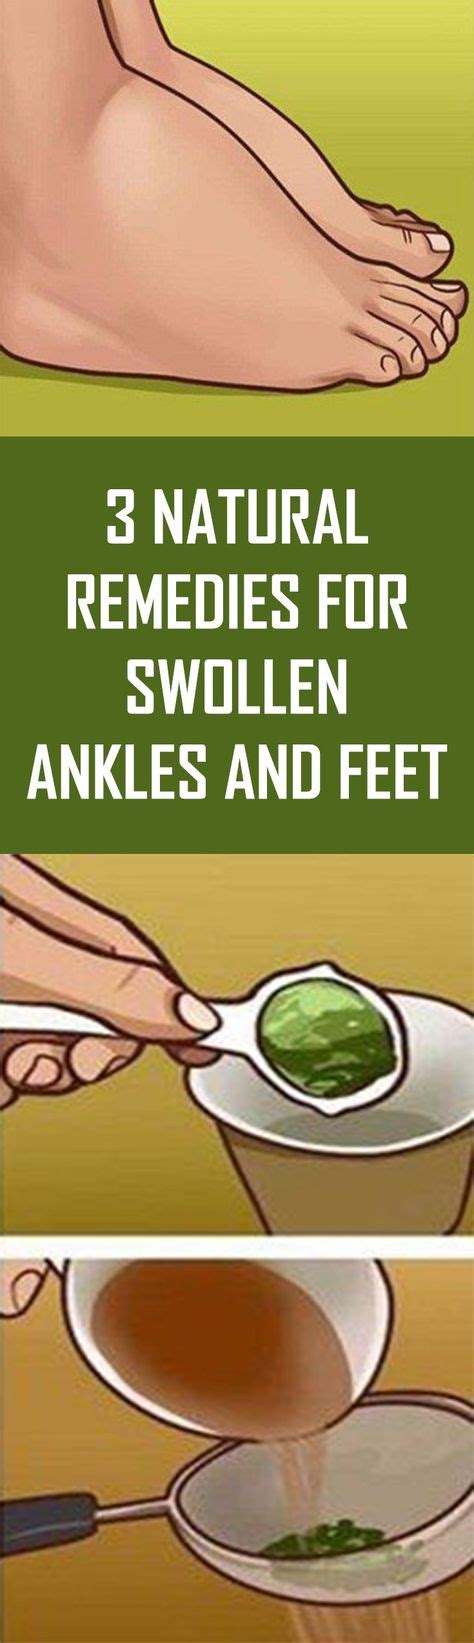 3 Natural Remedies For Swollen Ankles and Feet, #body #Care #feetcare # ...